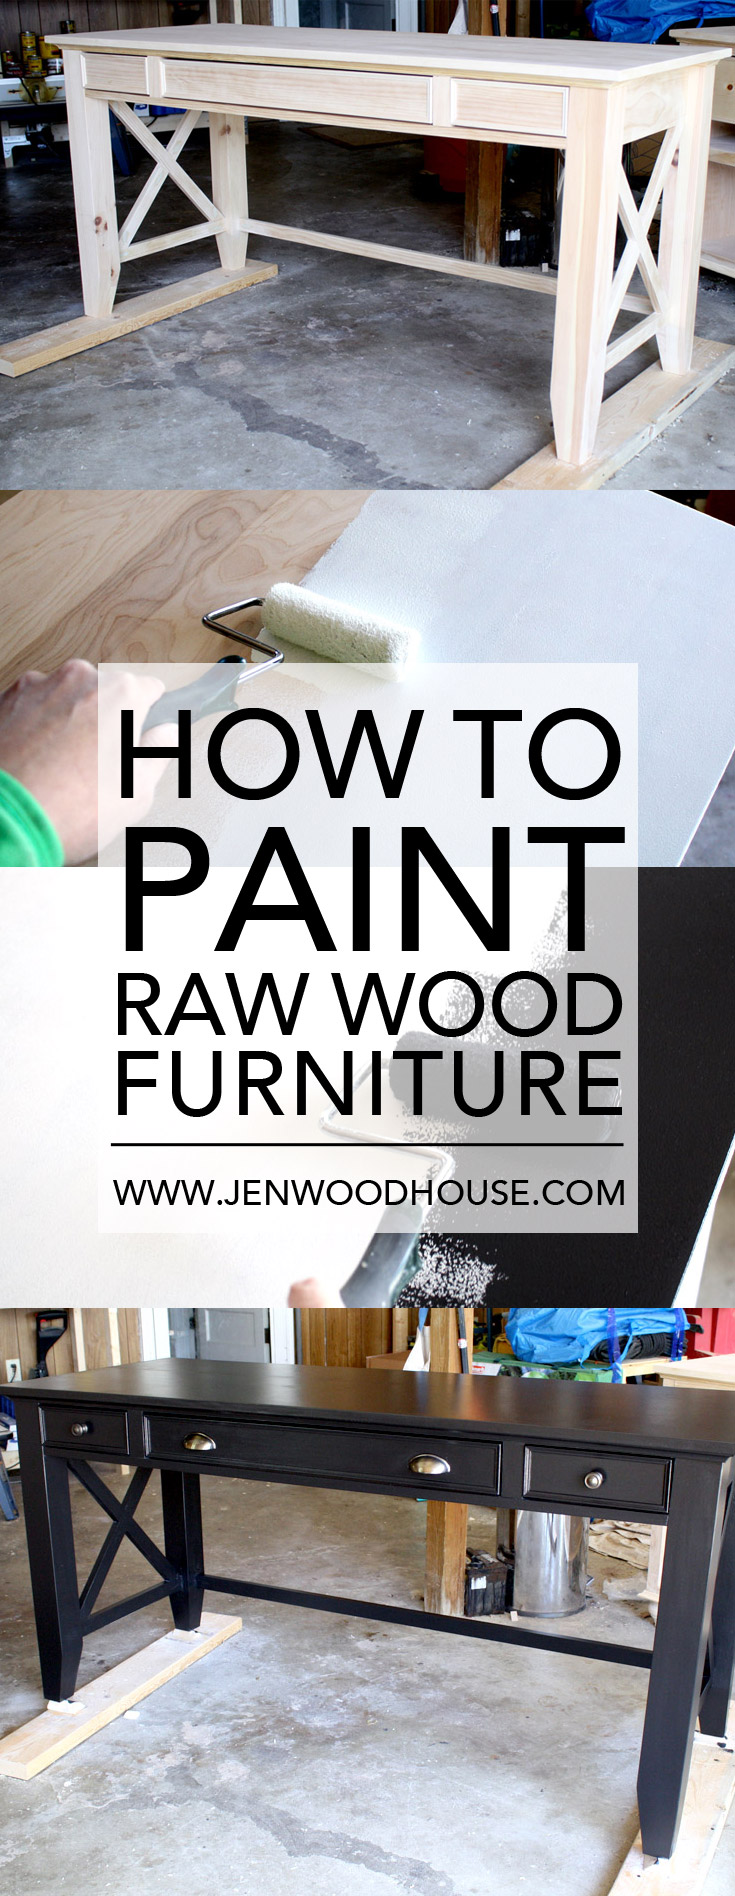 In-depth tutorial on how to paint raw wood furniture | www.jenwoodhouse.com